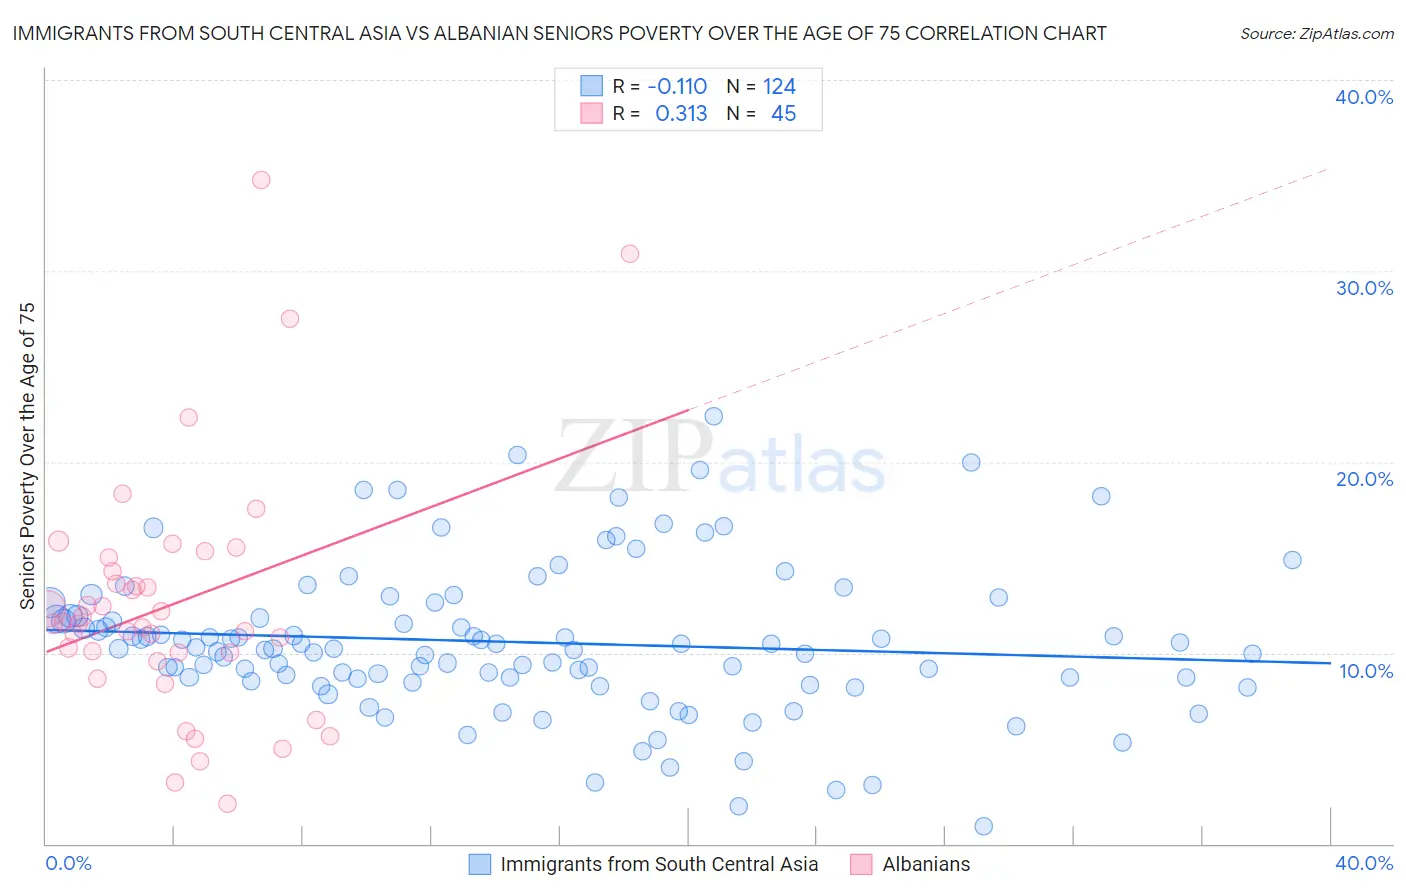 Immigrants from South Central Asia vs Albanian Seniors Poverty Over the Age of 75